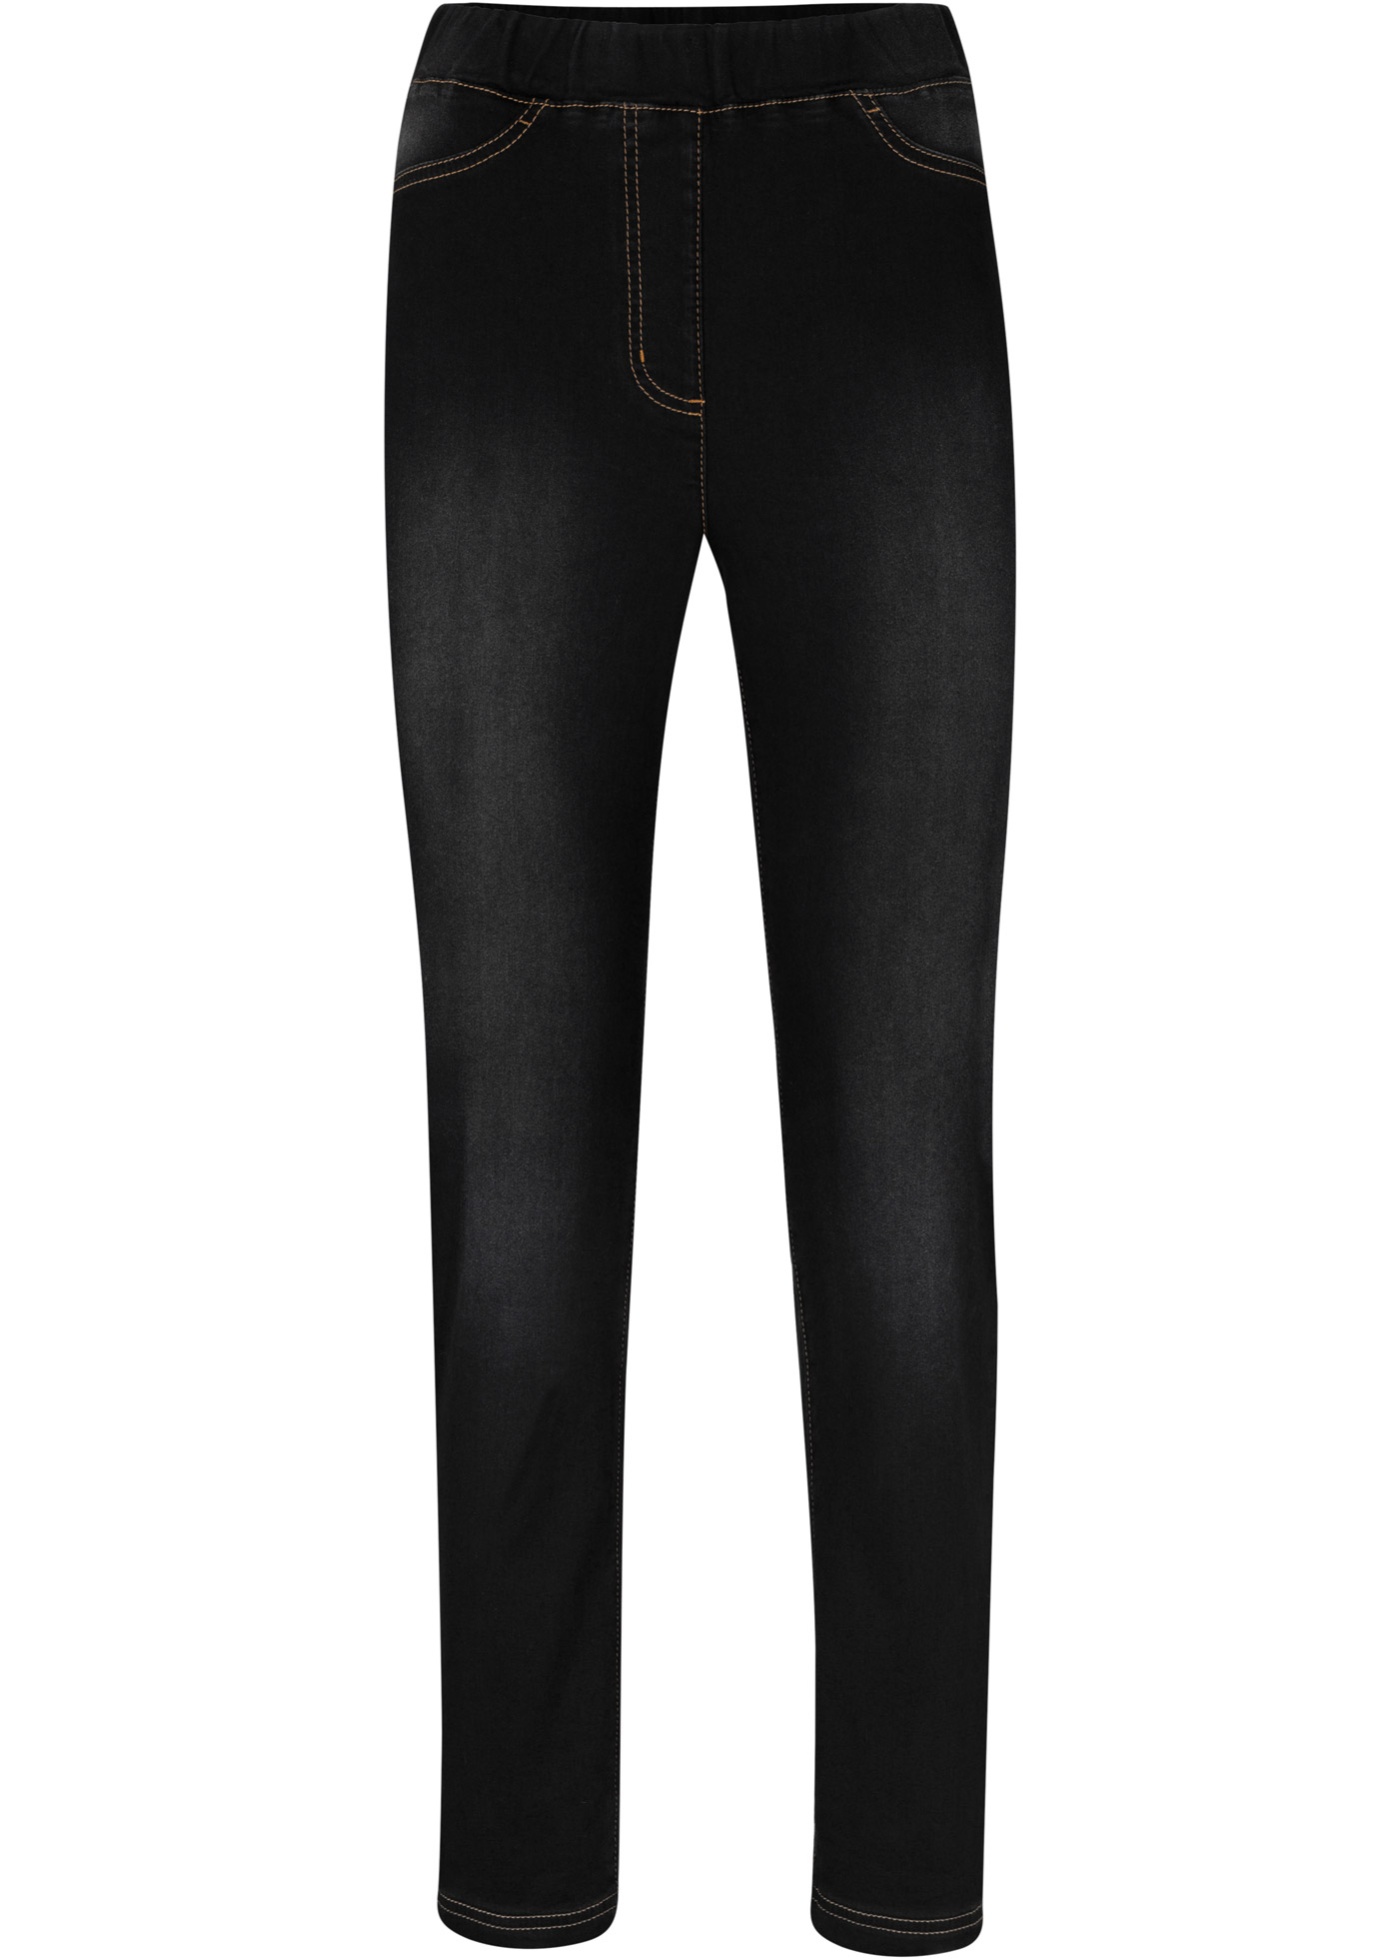 jegging taille haute avec fonction thermo-stretch, taille confortable